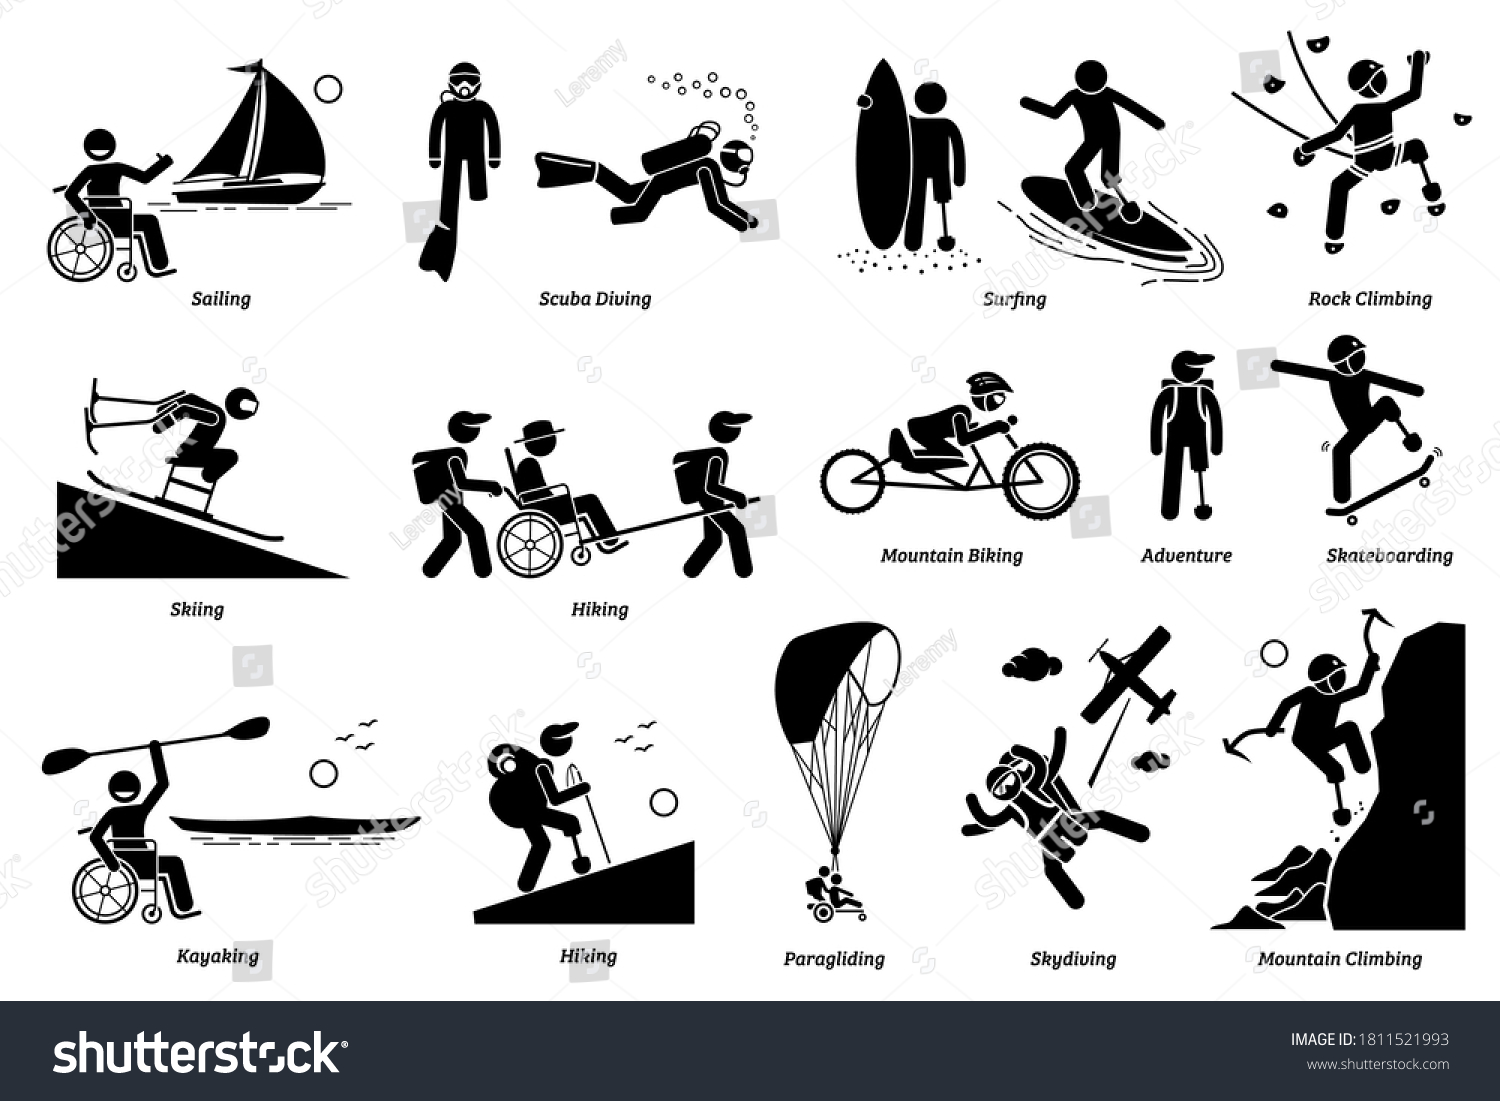 SVG of Adaptive recreational activities for handicapped or disabled people stick figure icons. Vector illustrations of extreme sports and accessible adventures for person with physical disabilities.  svg